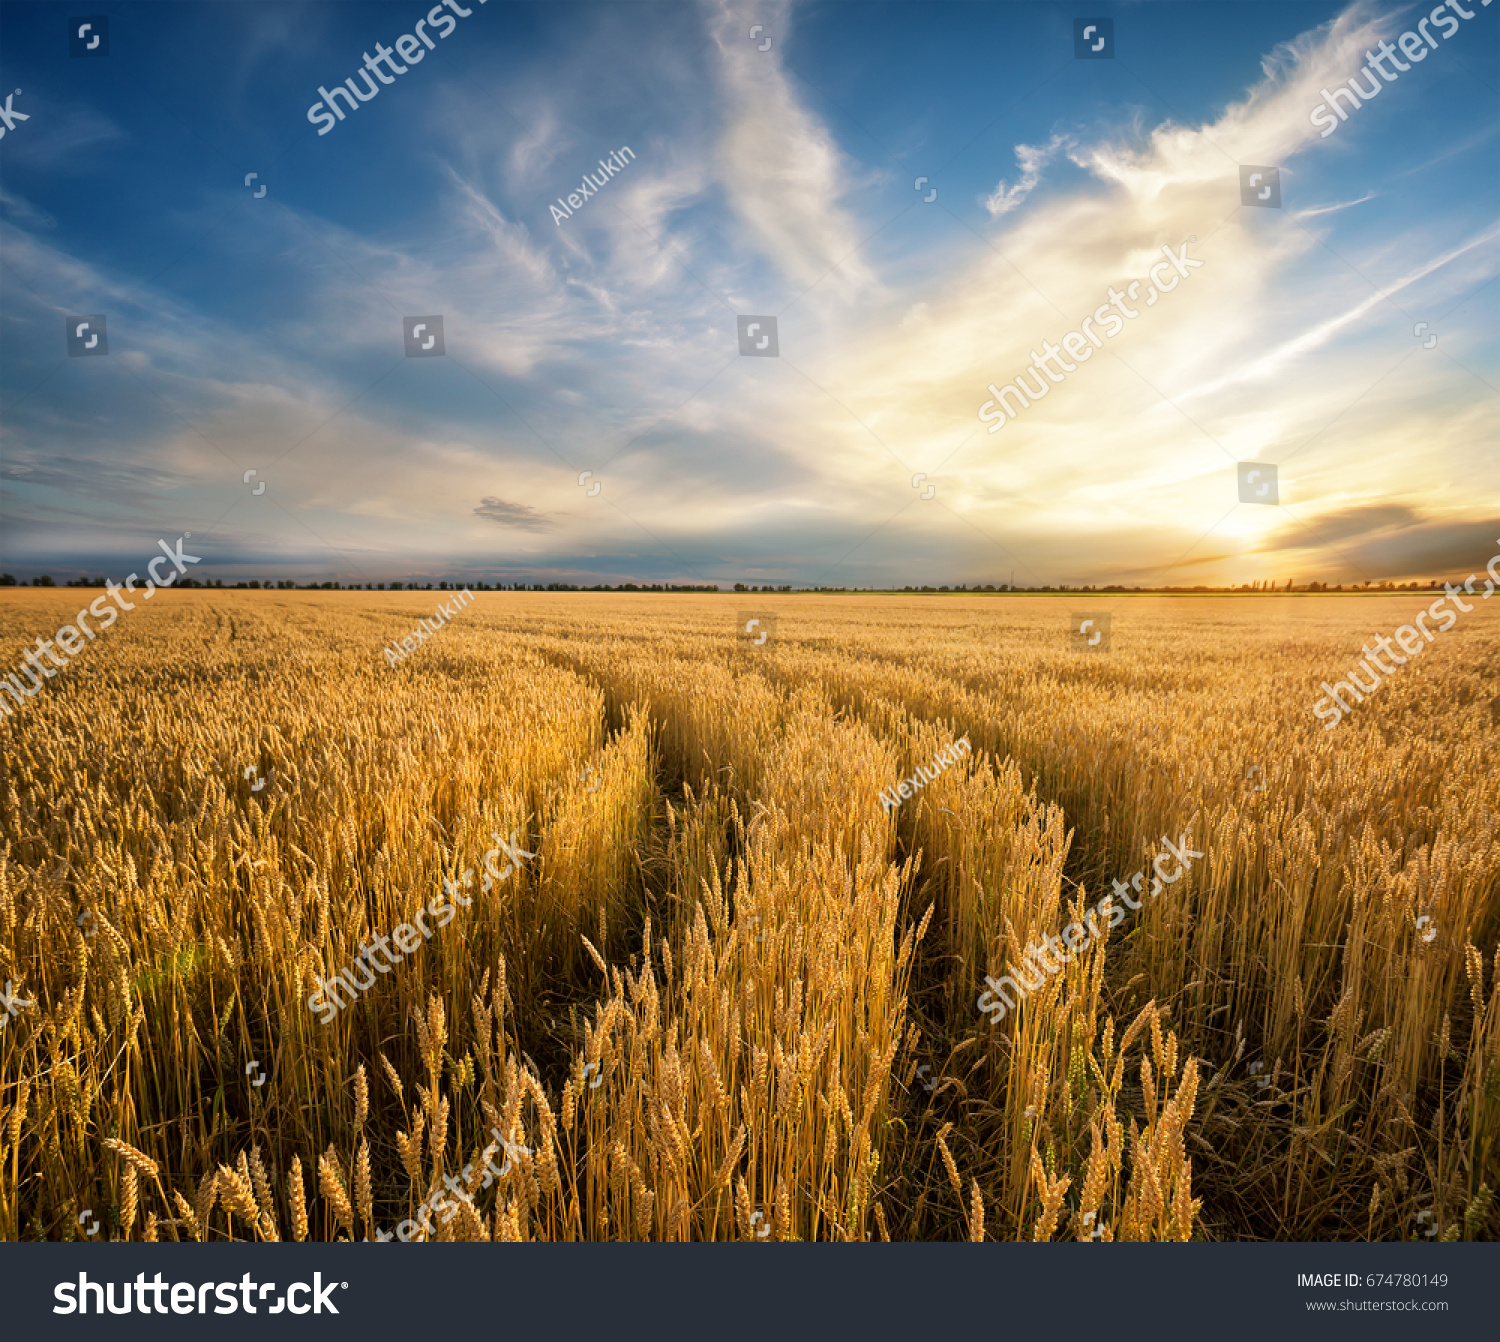 Road to the field with yellow ripening wheat ears. Rustic field at sunset. The idea of a rich harvest, growth and prosperity. The concept of a successful move forward. #674780149